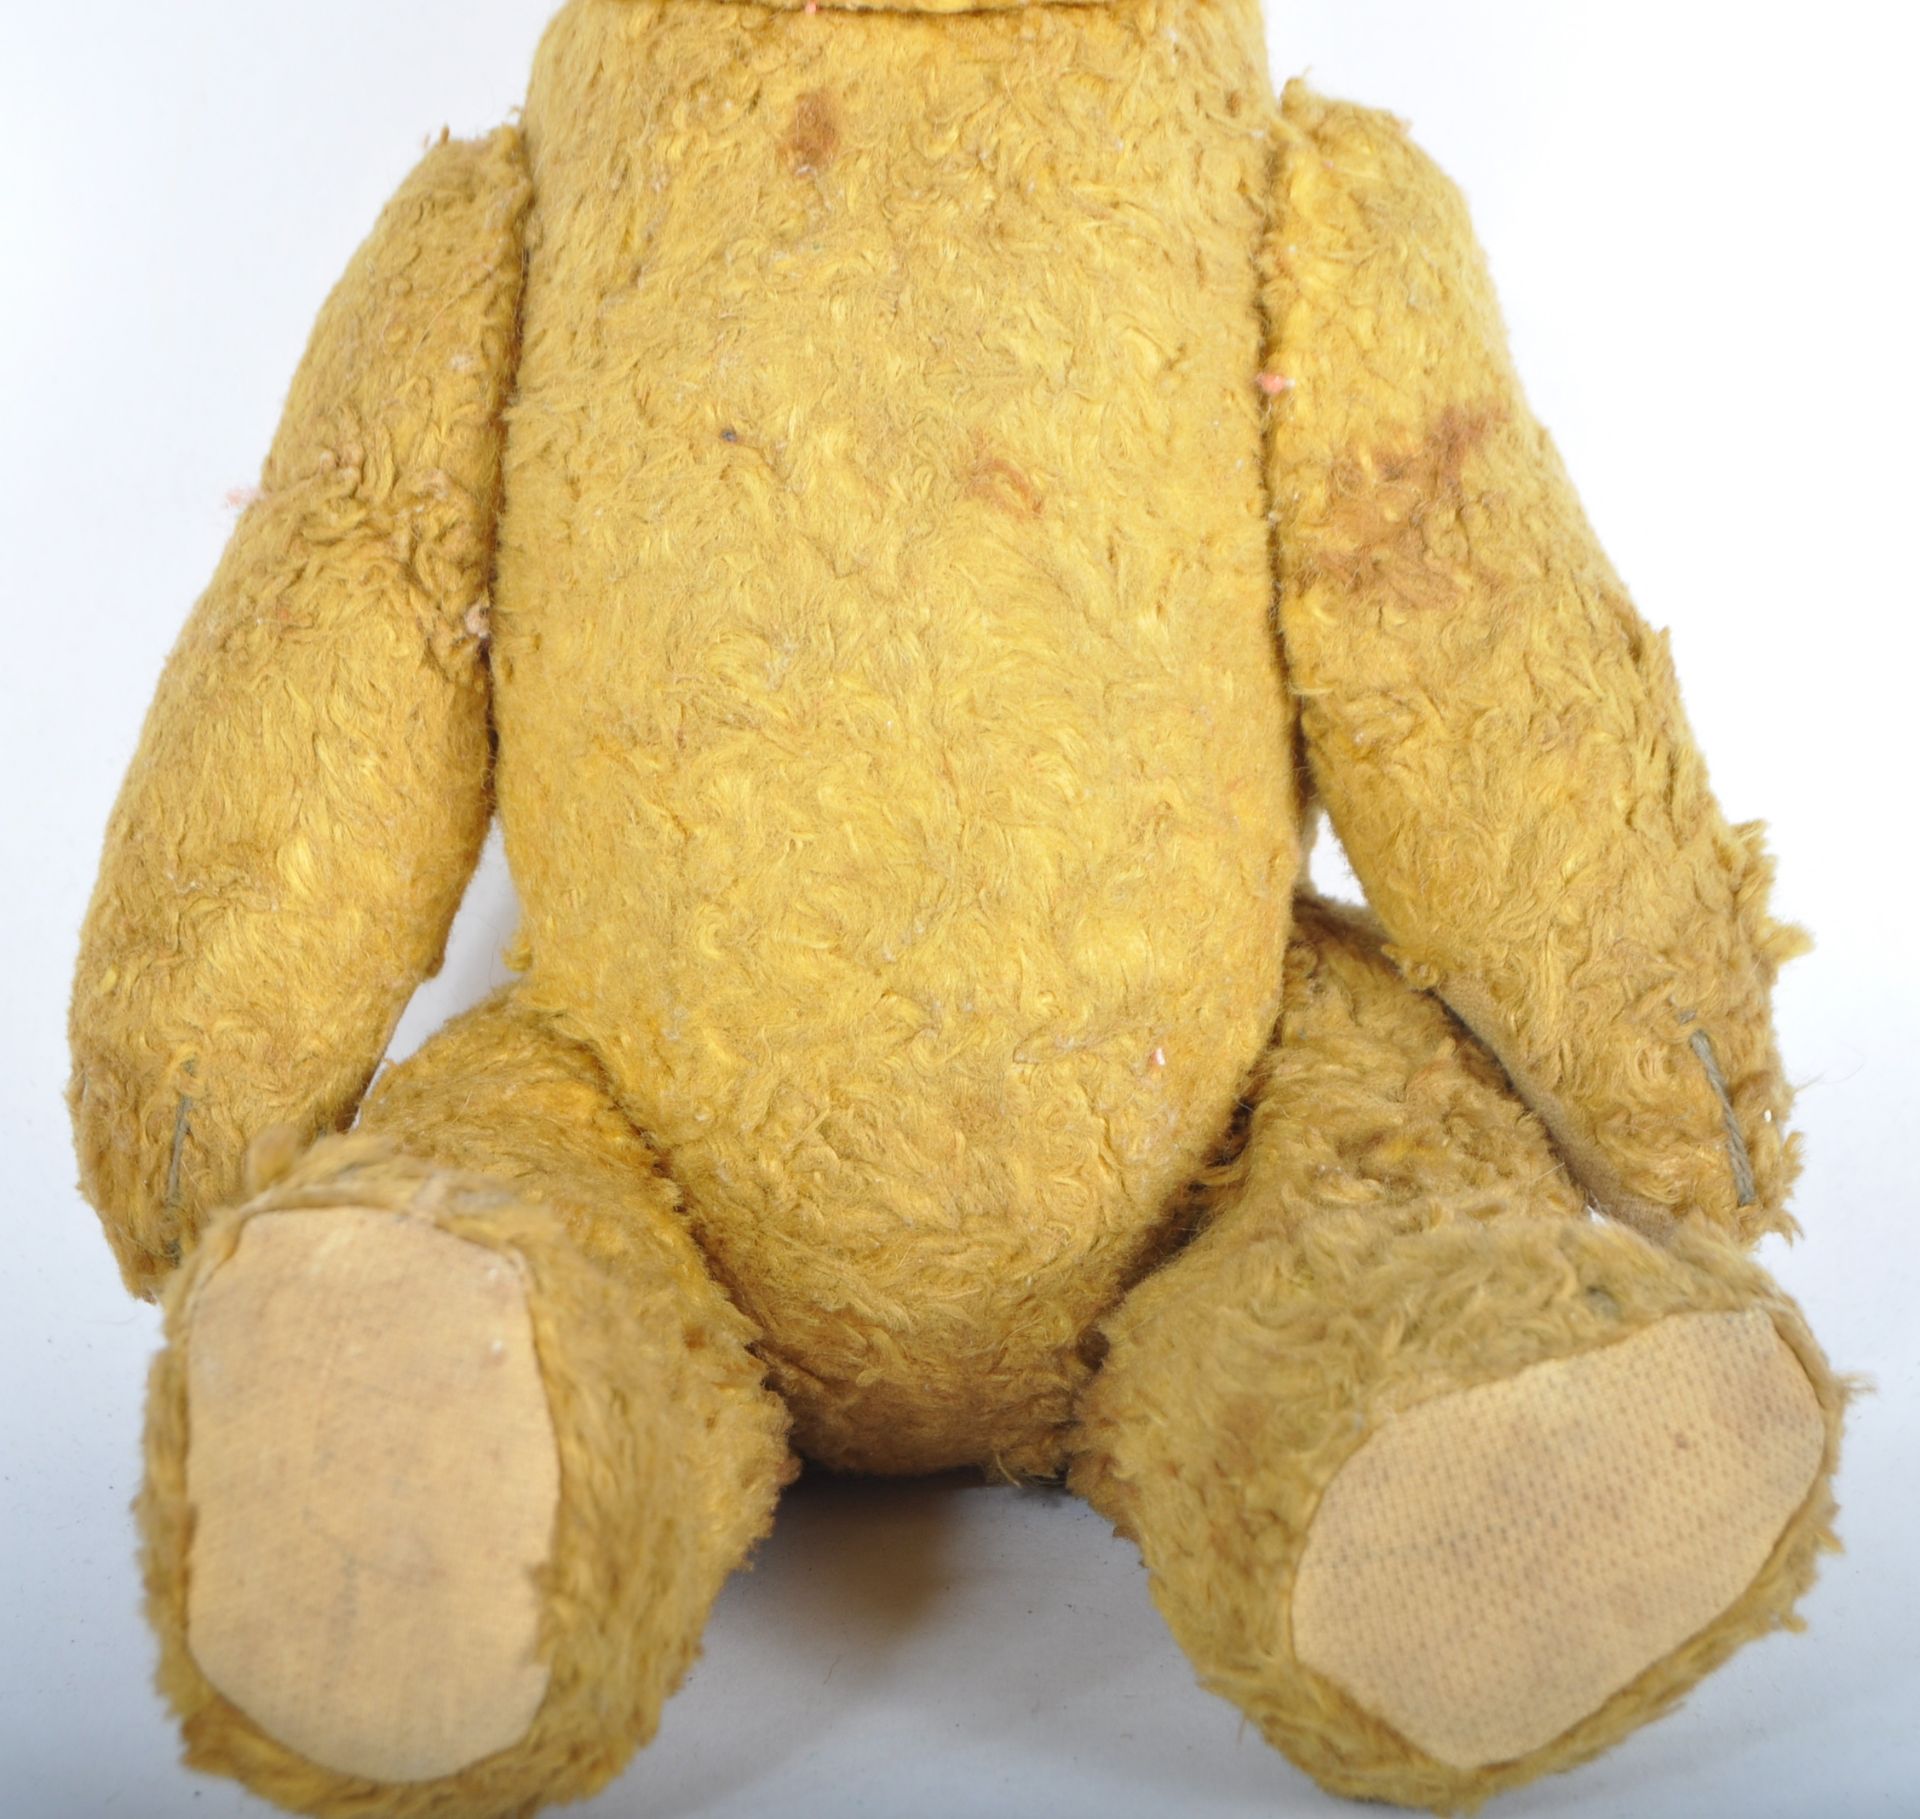 EARLY 20TH CENTURY ENGLISH SOFT TOY TEDDY BEAR - Image 3 of 4